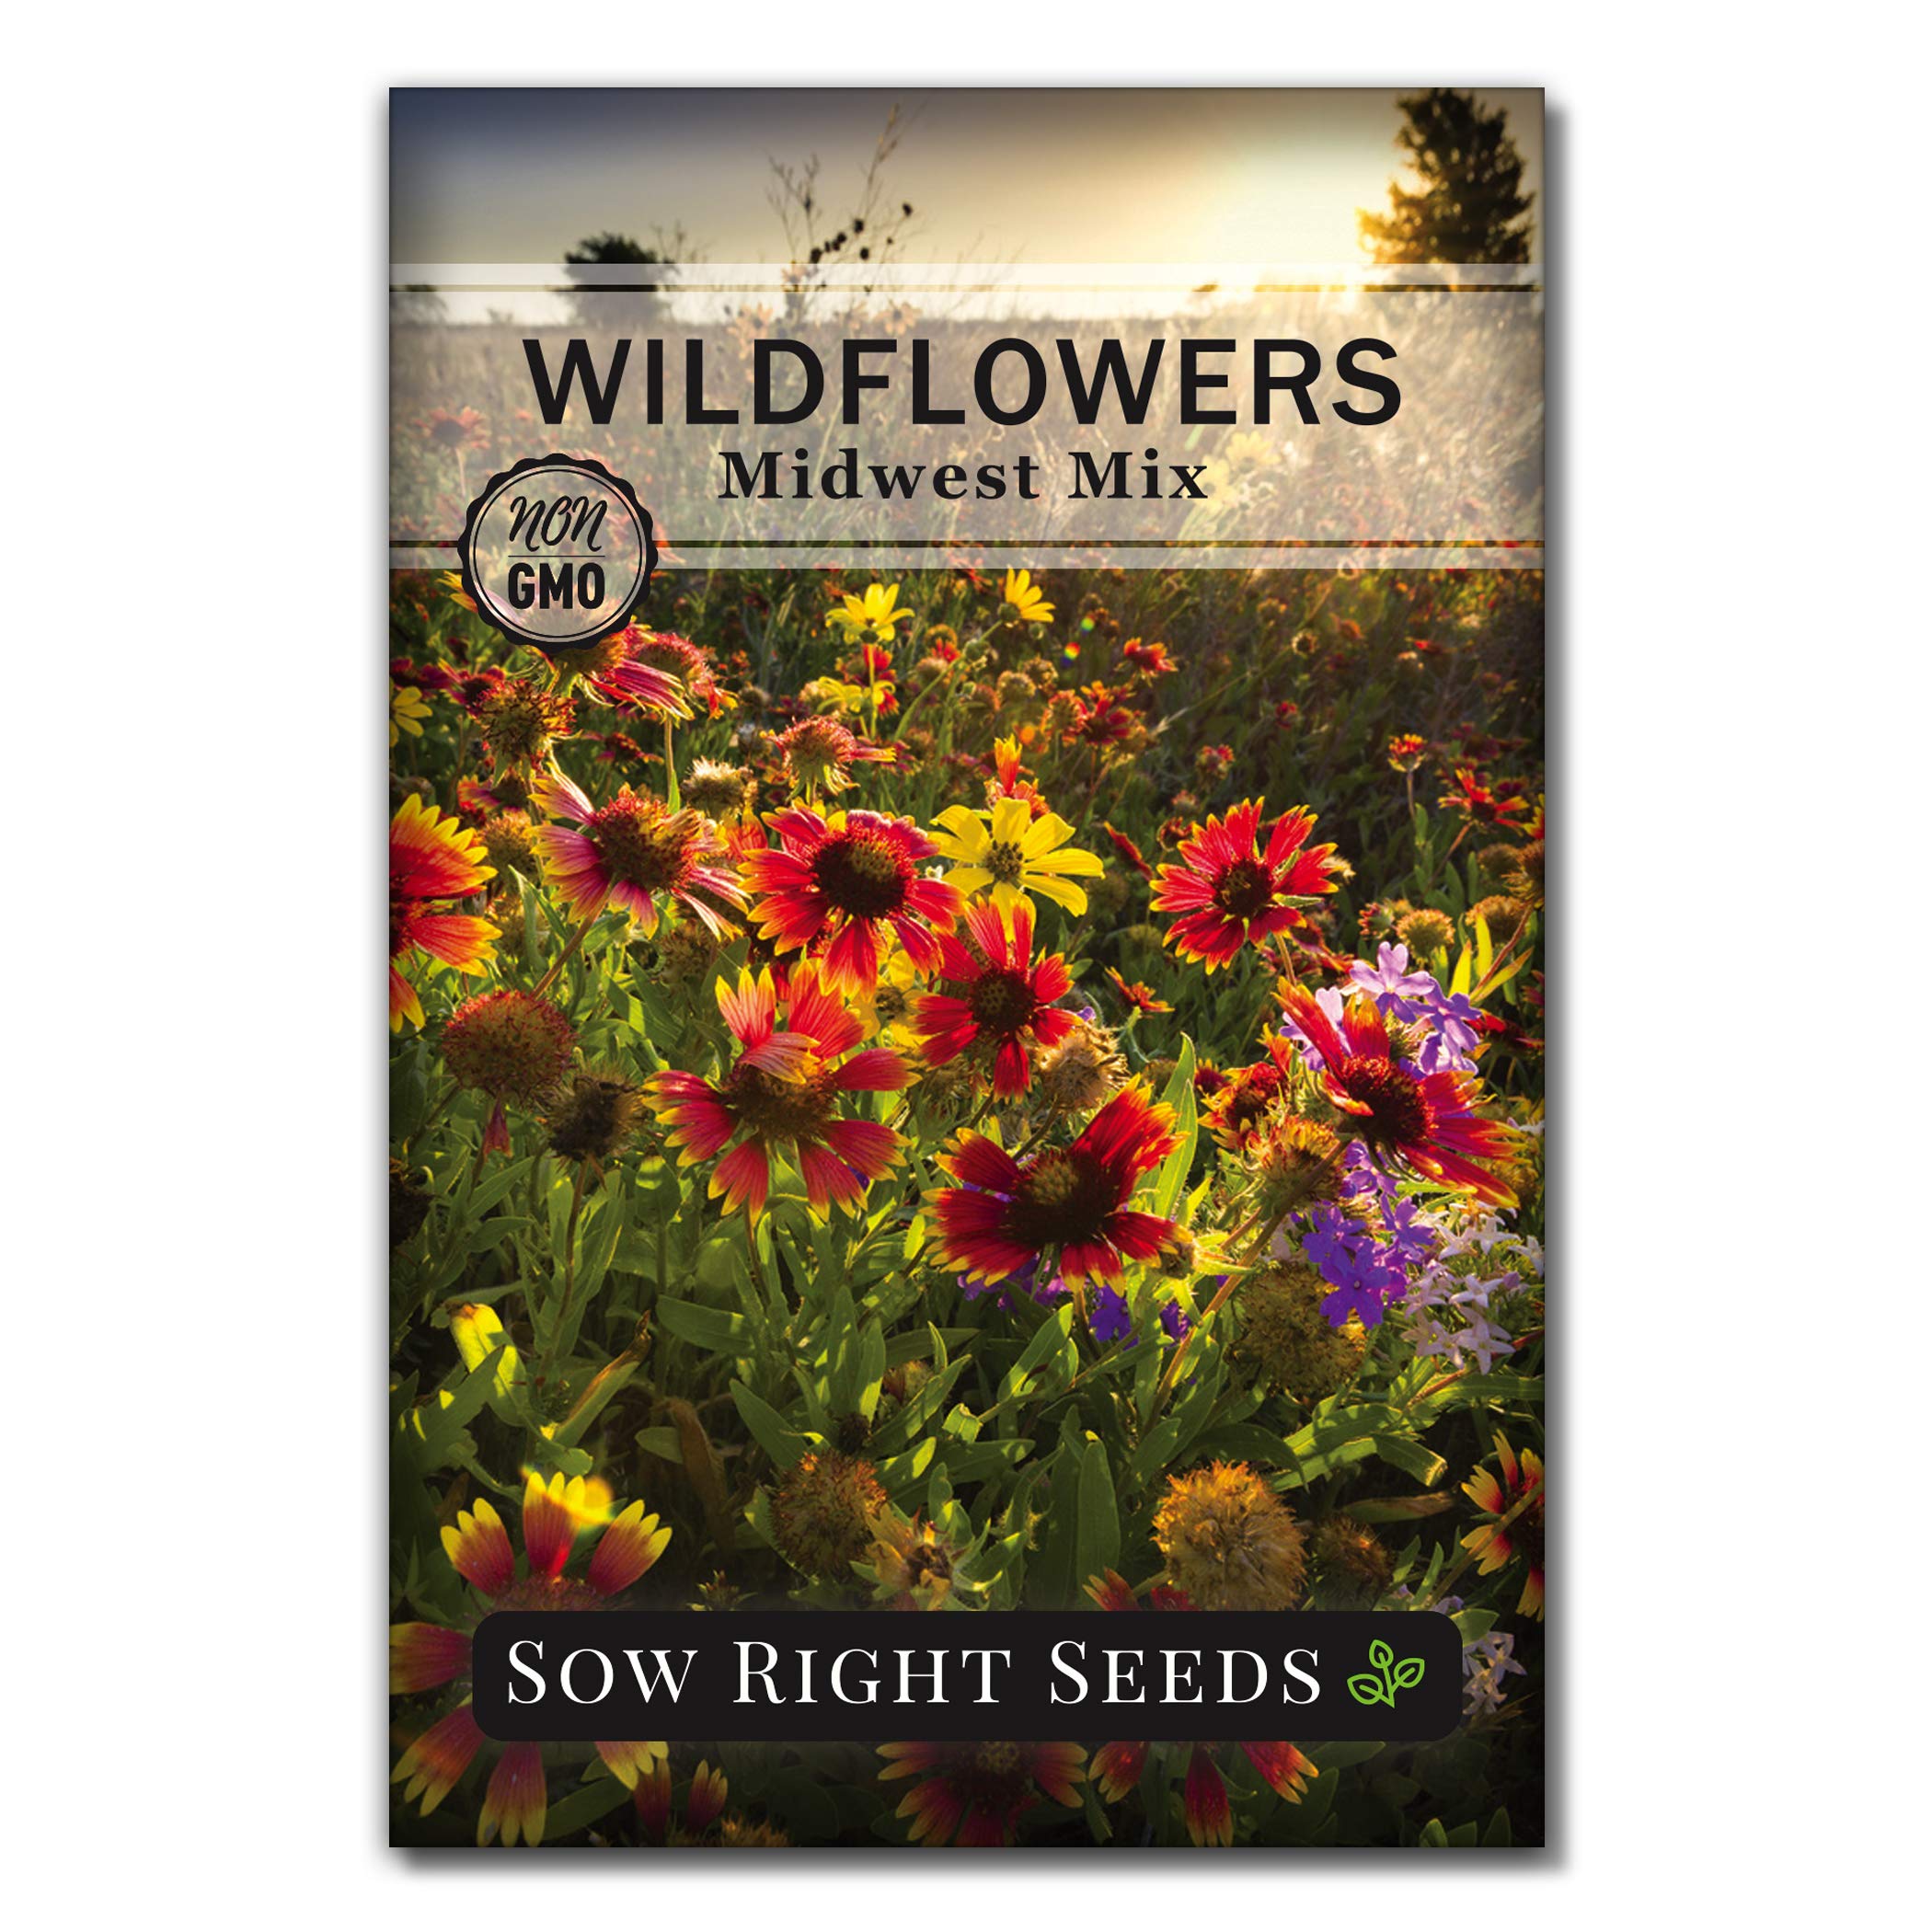 Sow Right Seeds - Wildflowers Seeds Mix for Planting in Midwest